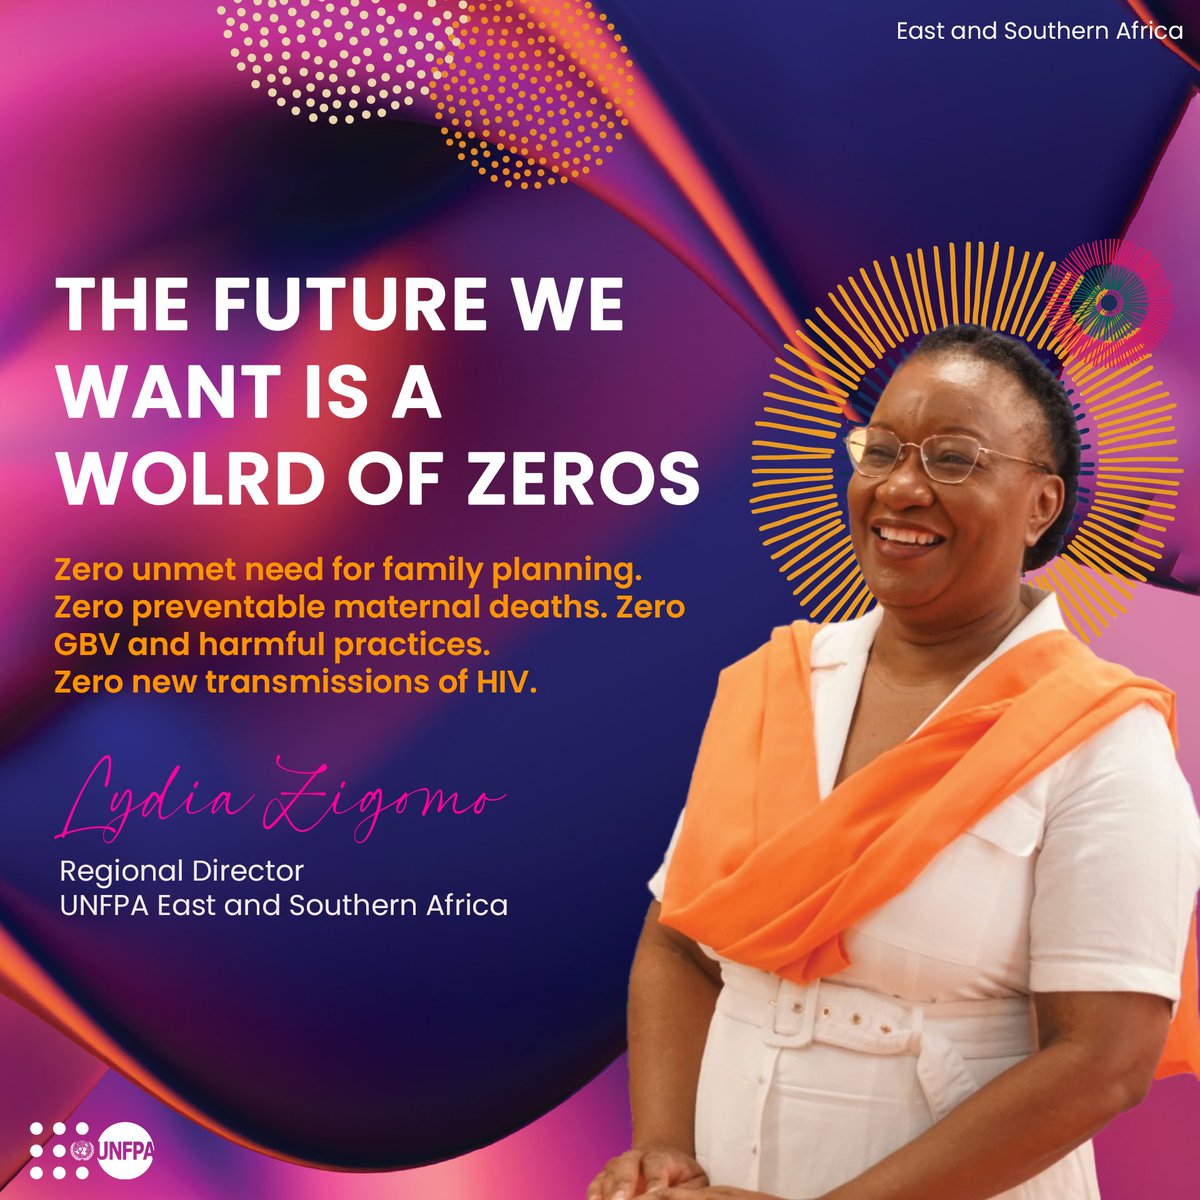 Proud of our team and our shared dream of a future world of zeros. This past year, UNFPA´s work has continued to transform lives and lay out the foundation for a more just, inclusive, and sustainable society. Read our year in review ow.ly/QShy50QzhBx